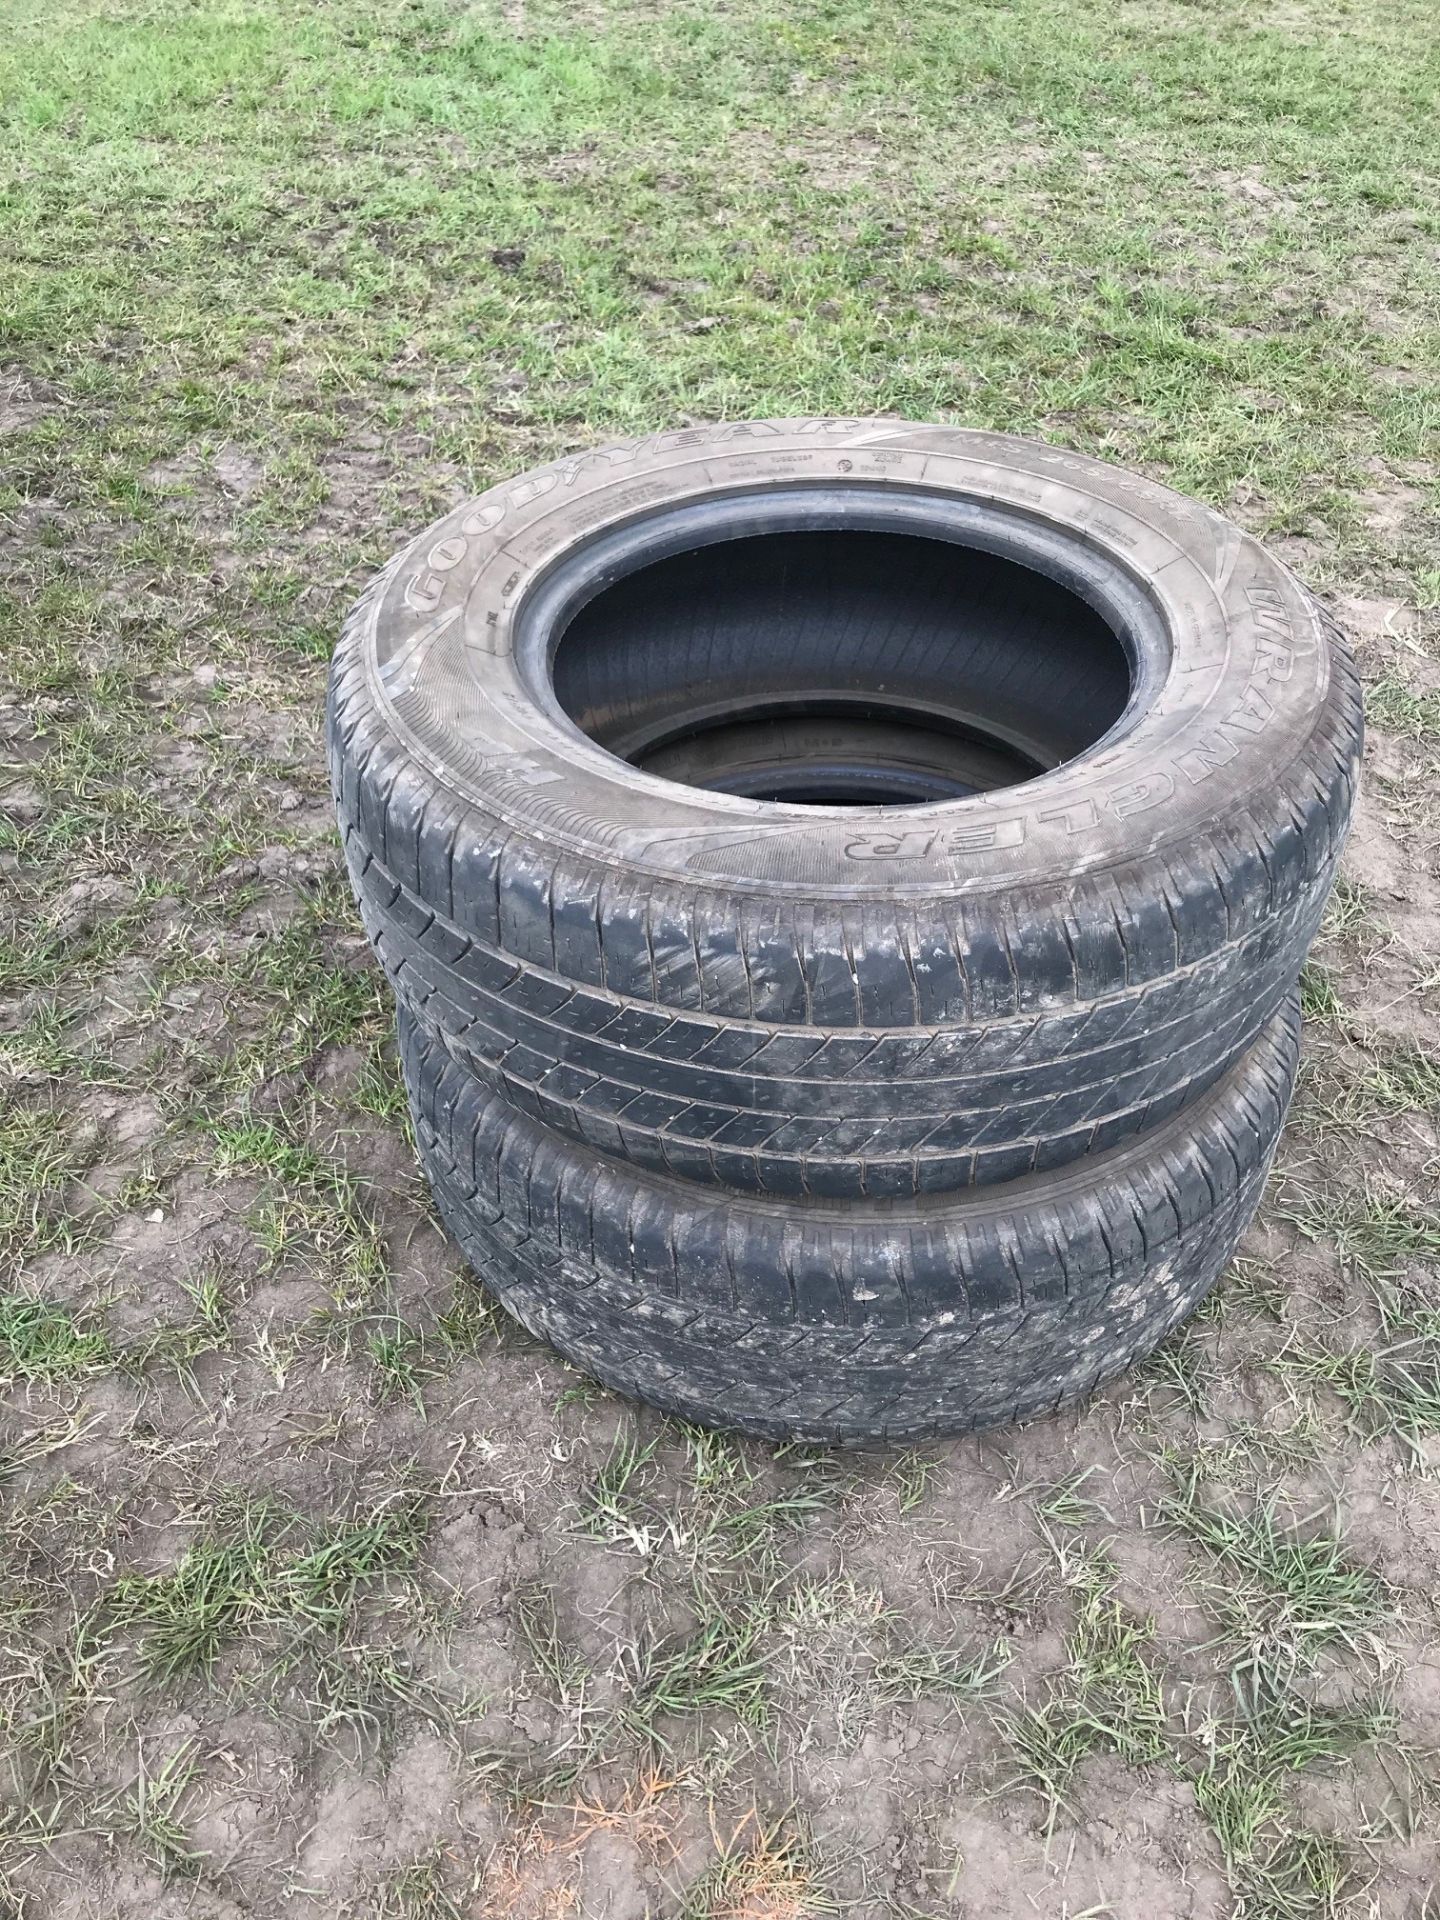 2x Goodyear 265/65 R17 from Toyota Hilux part worn